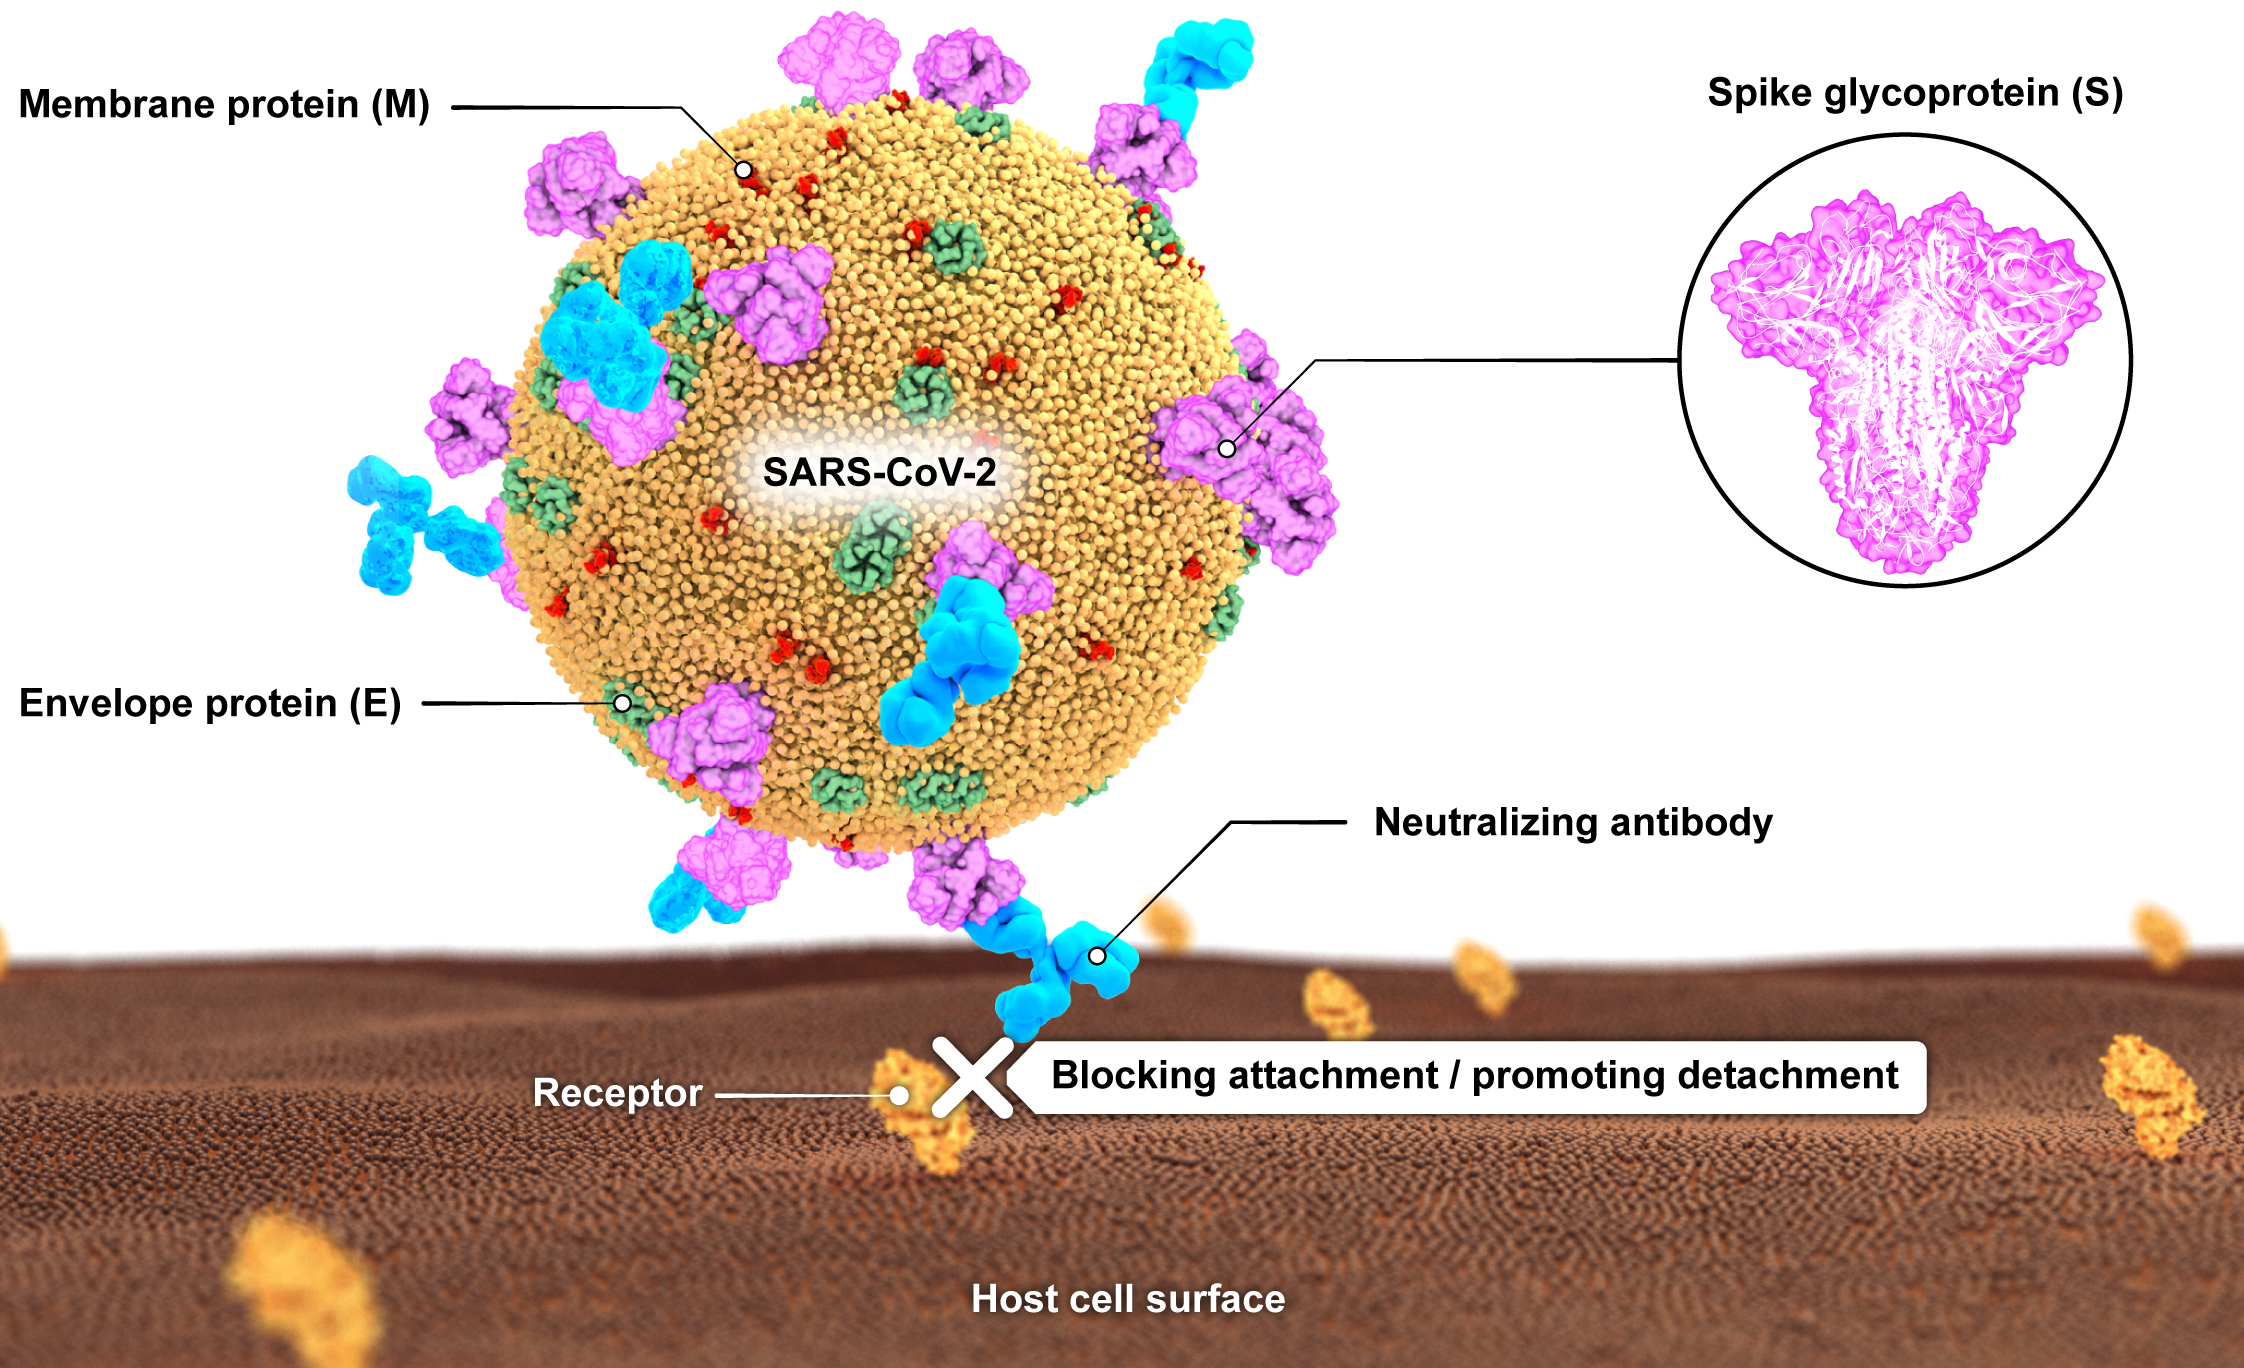 A schematic illustration of SARS-CoV-2 with its main surface antigens including spike (S), membrane (M) and envelope (E) proteins. Neutralizing antibodies block virus attachment to its receptor on cell surface.